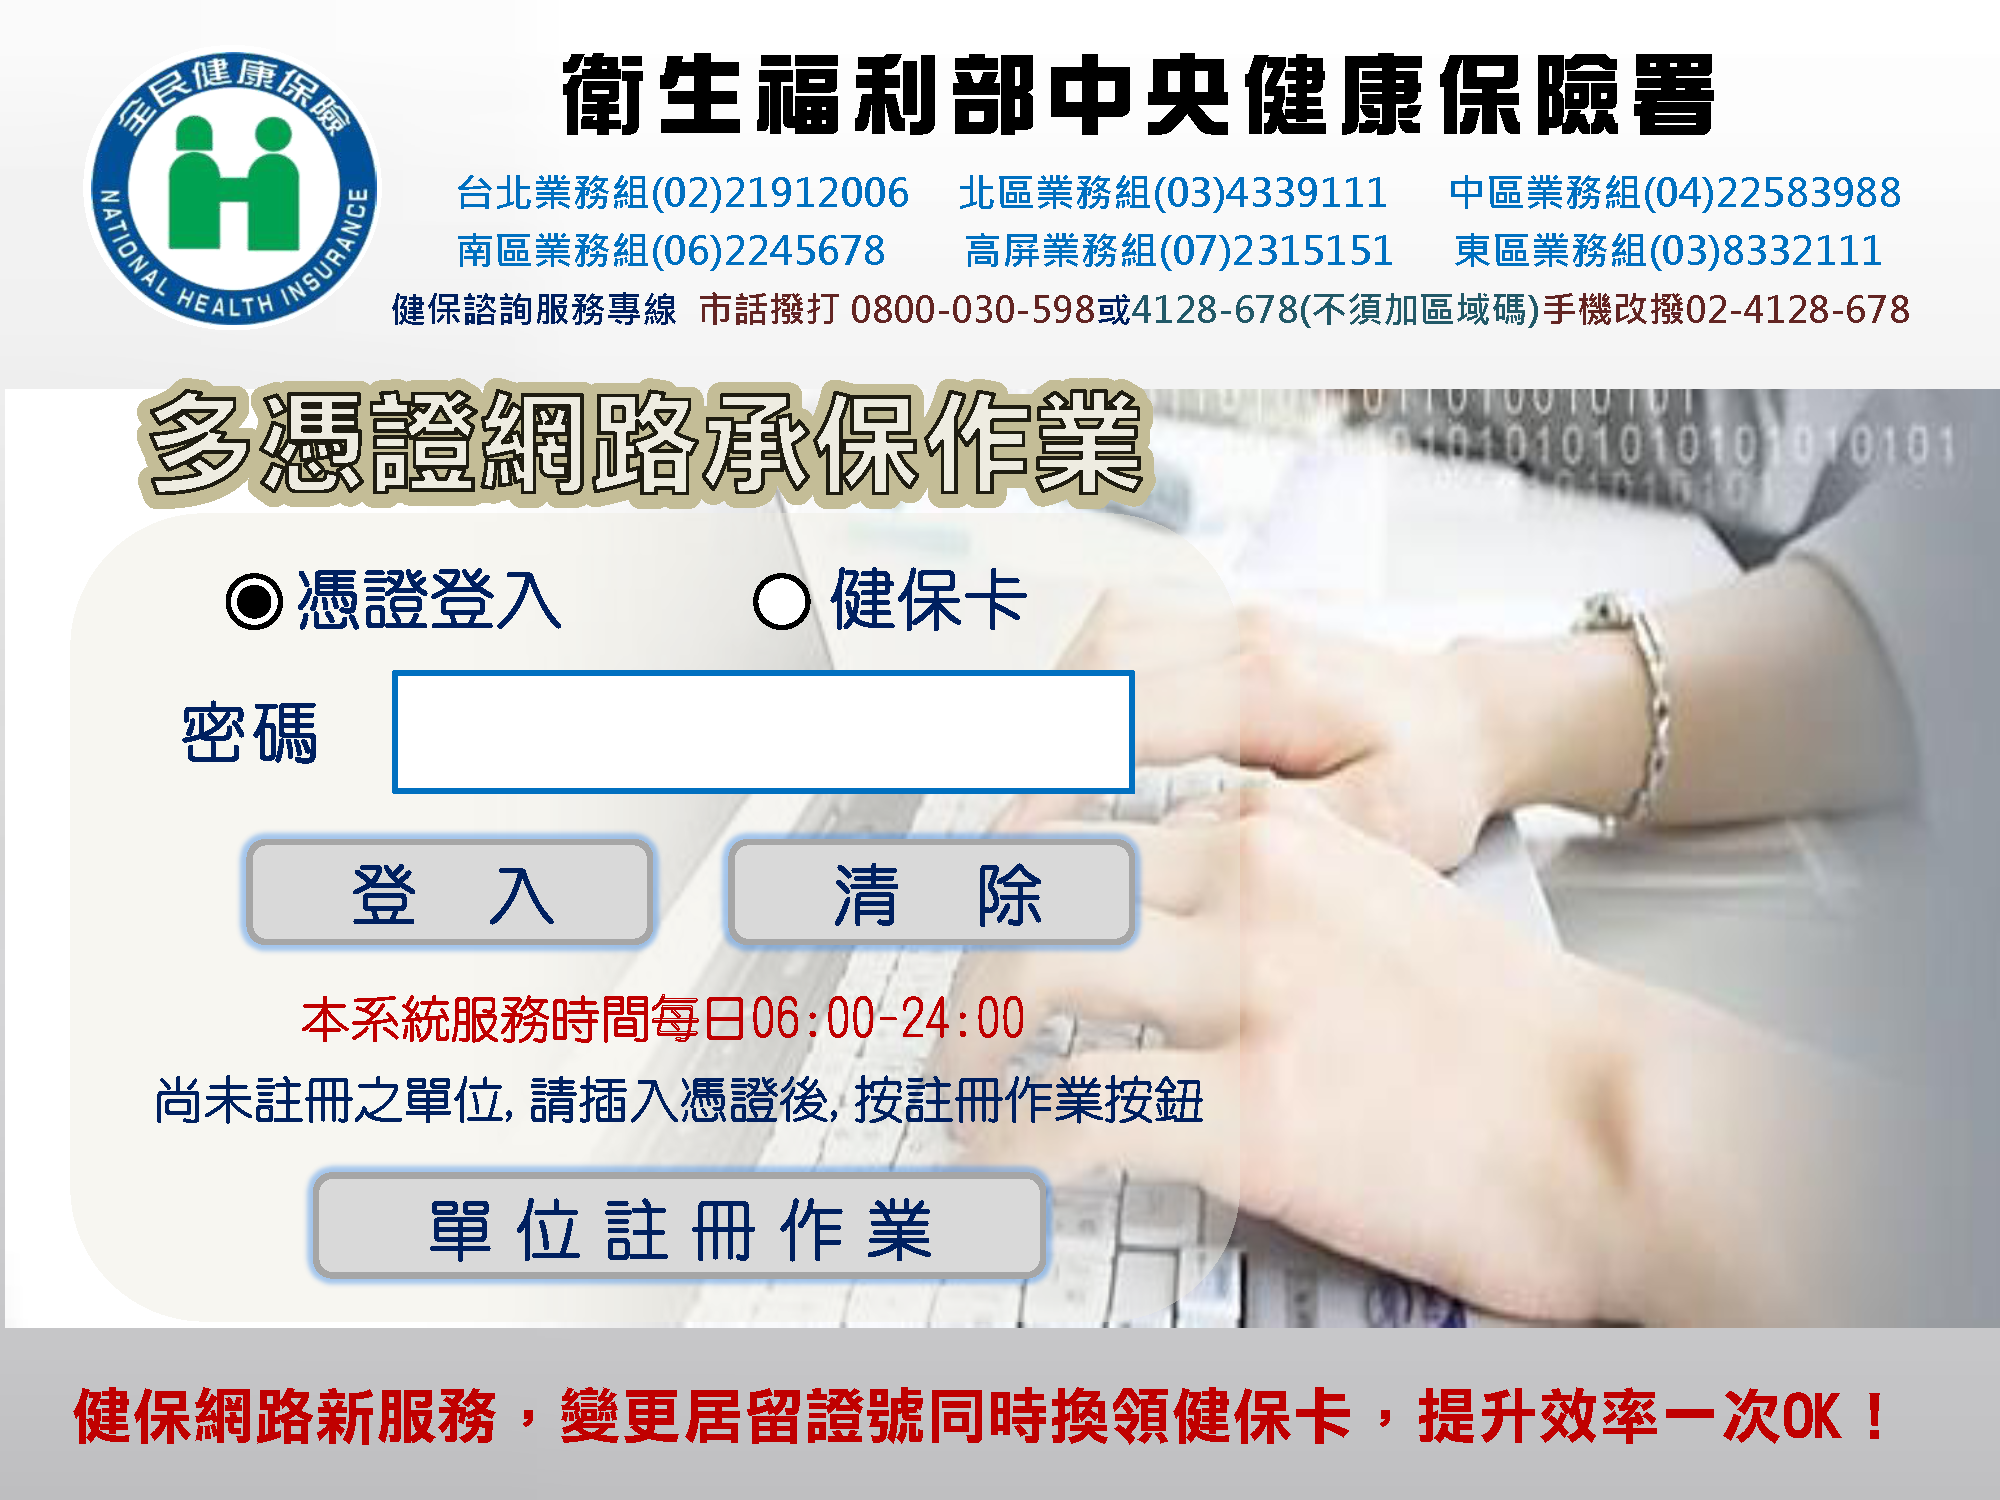 To apply for insurance with "New UI No. of Foreign Nationals", you must first apply for a new health insurance card. (Photo / Provided by the Ministry of Health and Welfare)